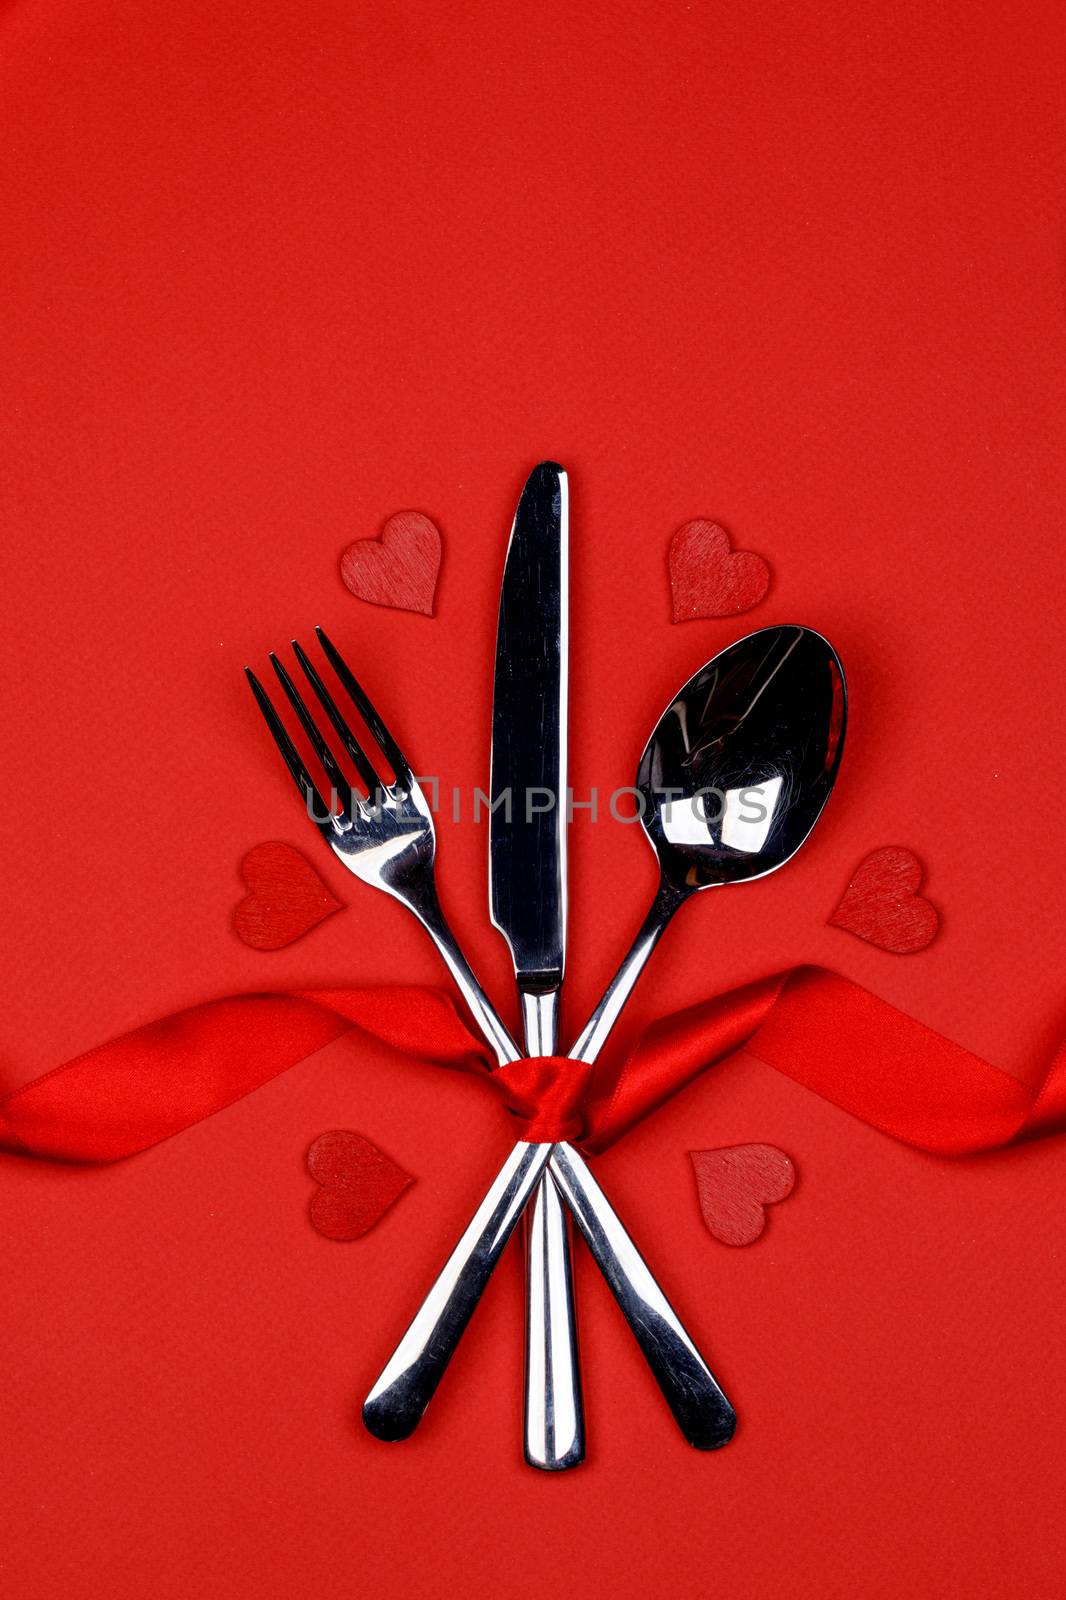 Cutlery set tied with silk ribbon and hearts on red background Valentine day dinner concept